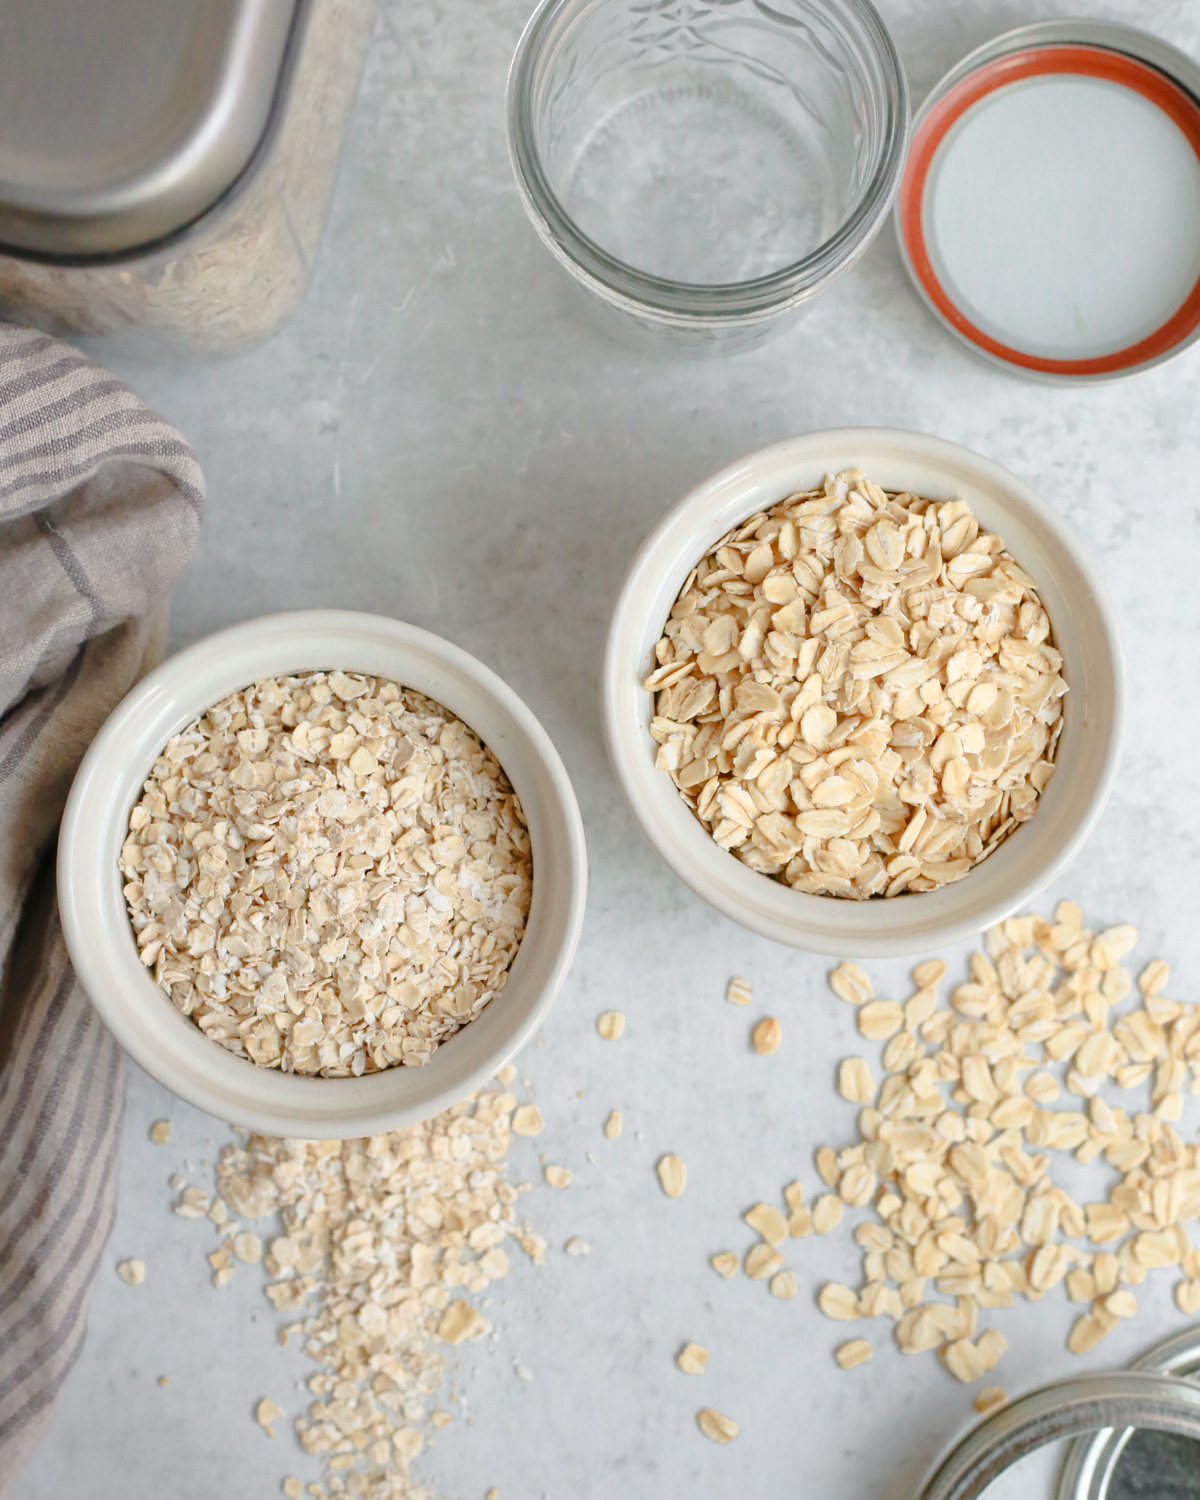 A side by side comparison of instant oats and quick oats or old fashioned oats, showing the differences in size and textures